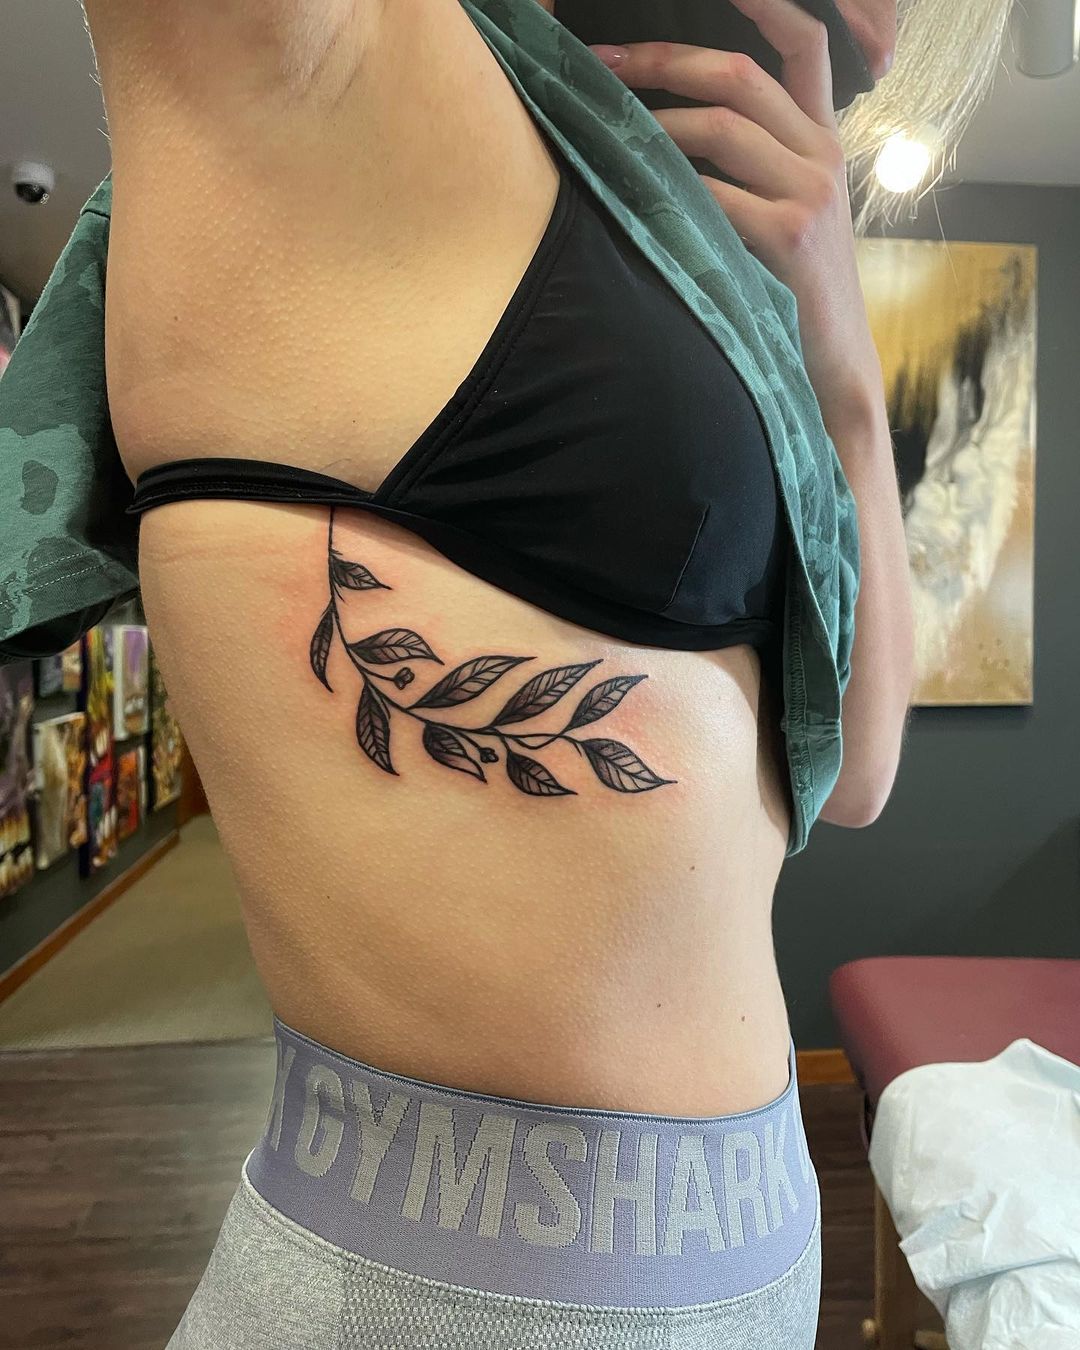 Valhalla Tattoo  Rib cage on the ribs first tattoo for a tough chic today  thanks Charlie carltattoos finelinetattoo fineline smalltattoos  tattooinspiration tattooinspo blackwork dotworktattoo butterflytattoo  tattooartist sydney 